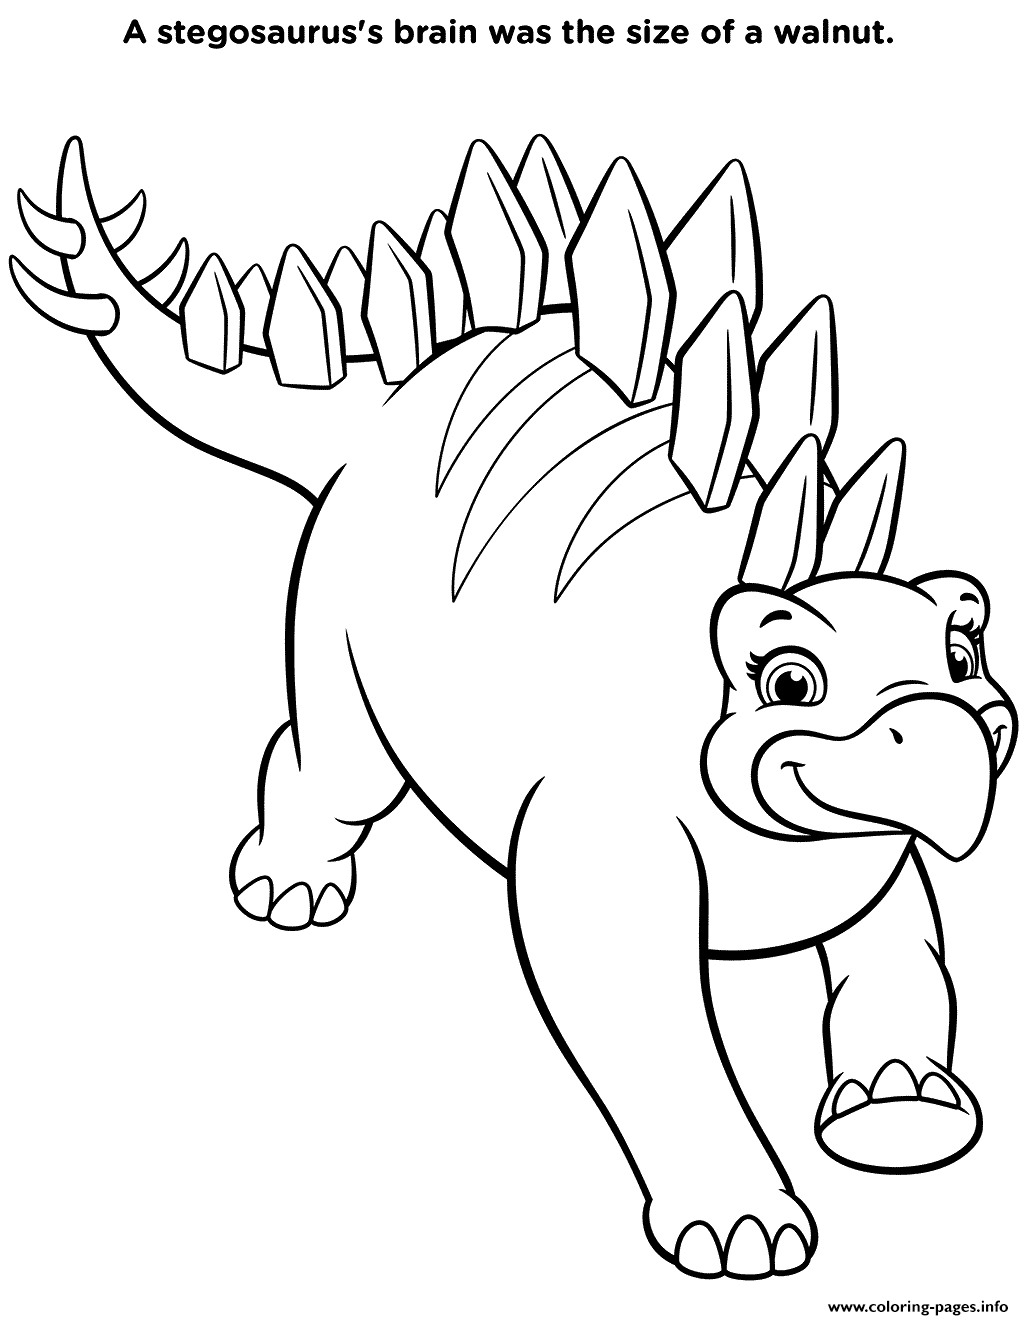 Dinosaur Stegosaurus From Dino Rescue Page coloring